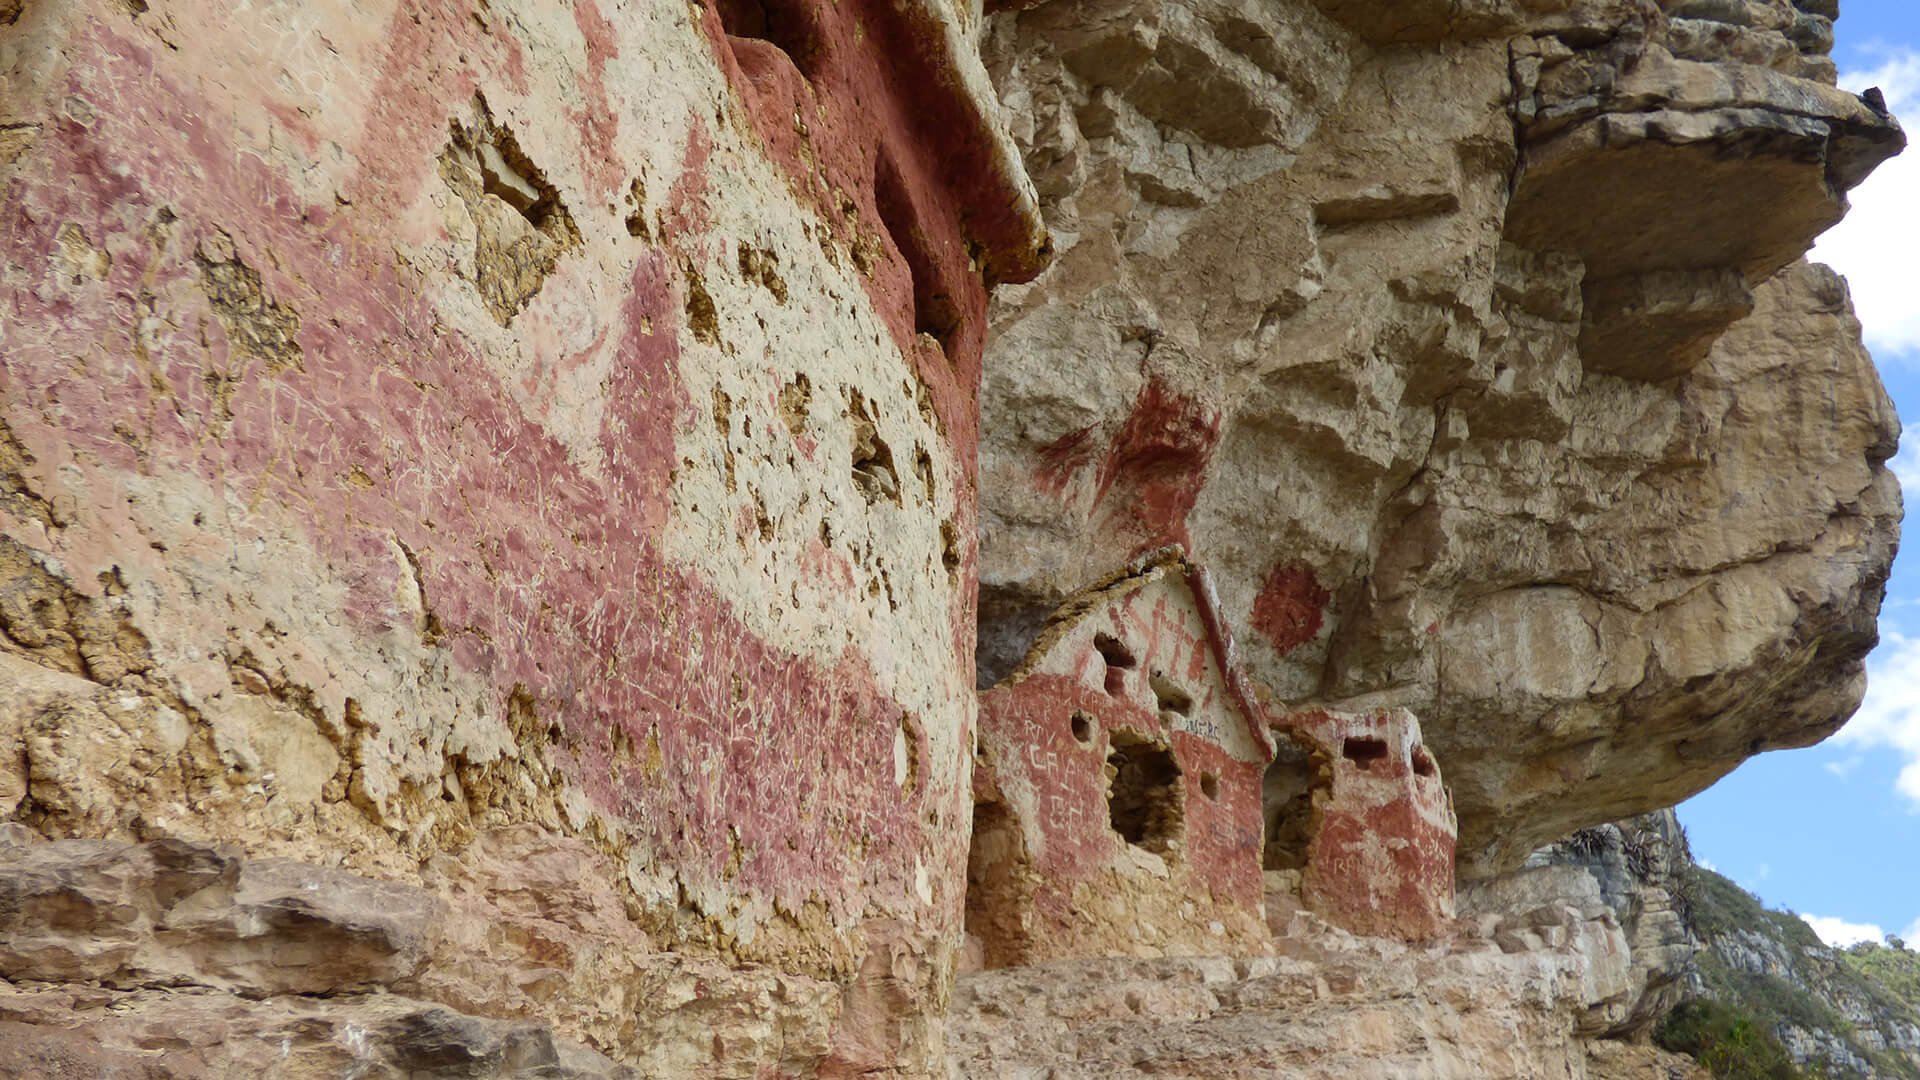 A close-up of the Revash mausoleums located at the mountain's vertical walls